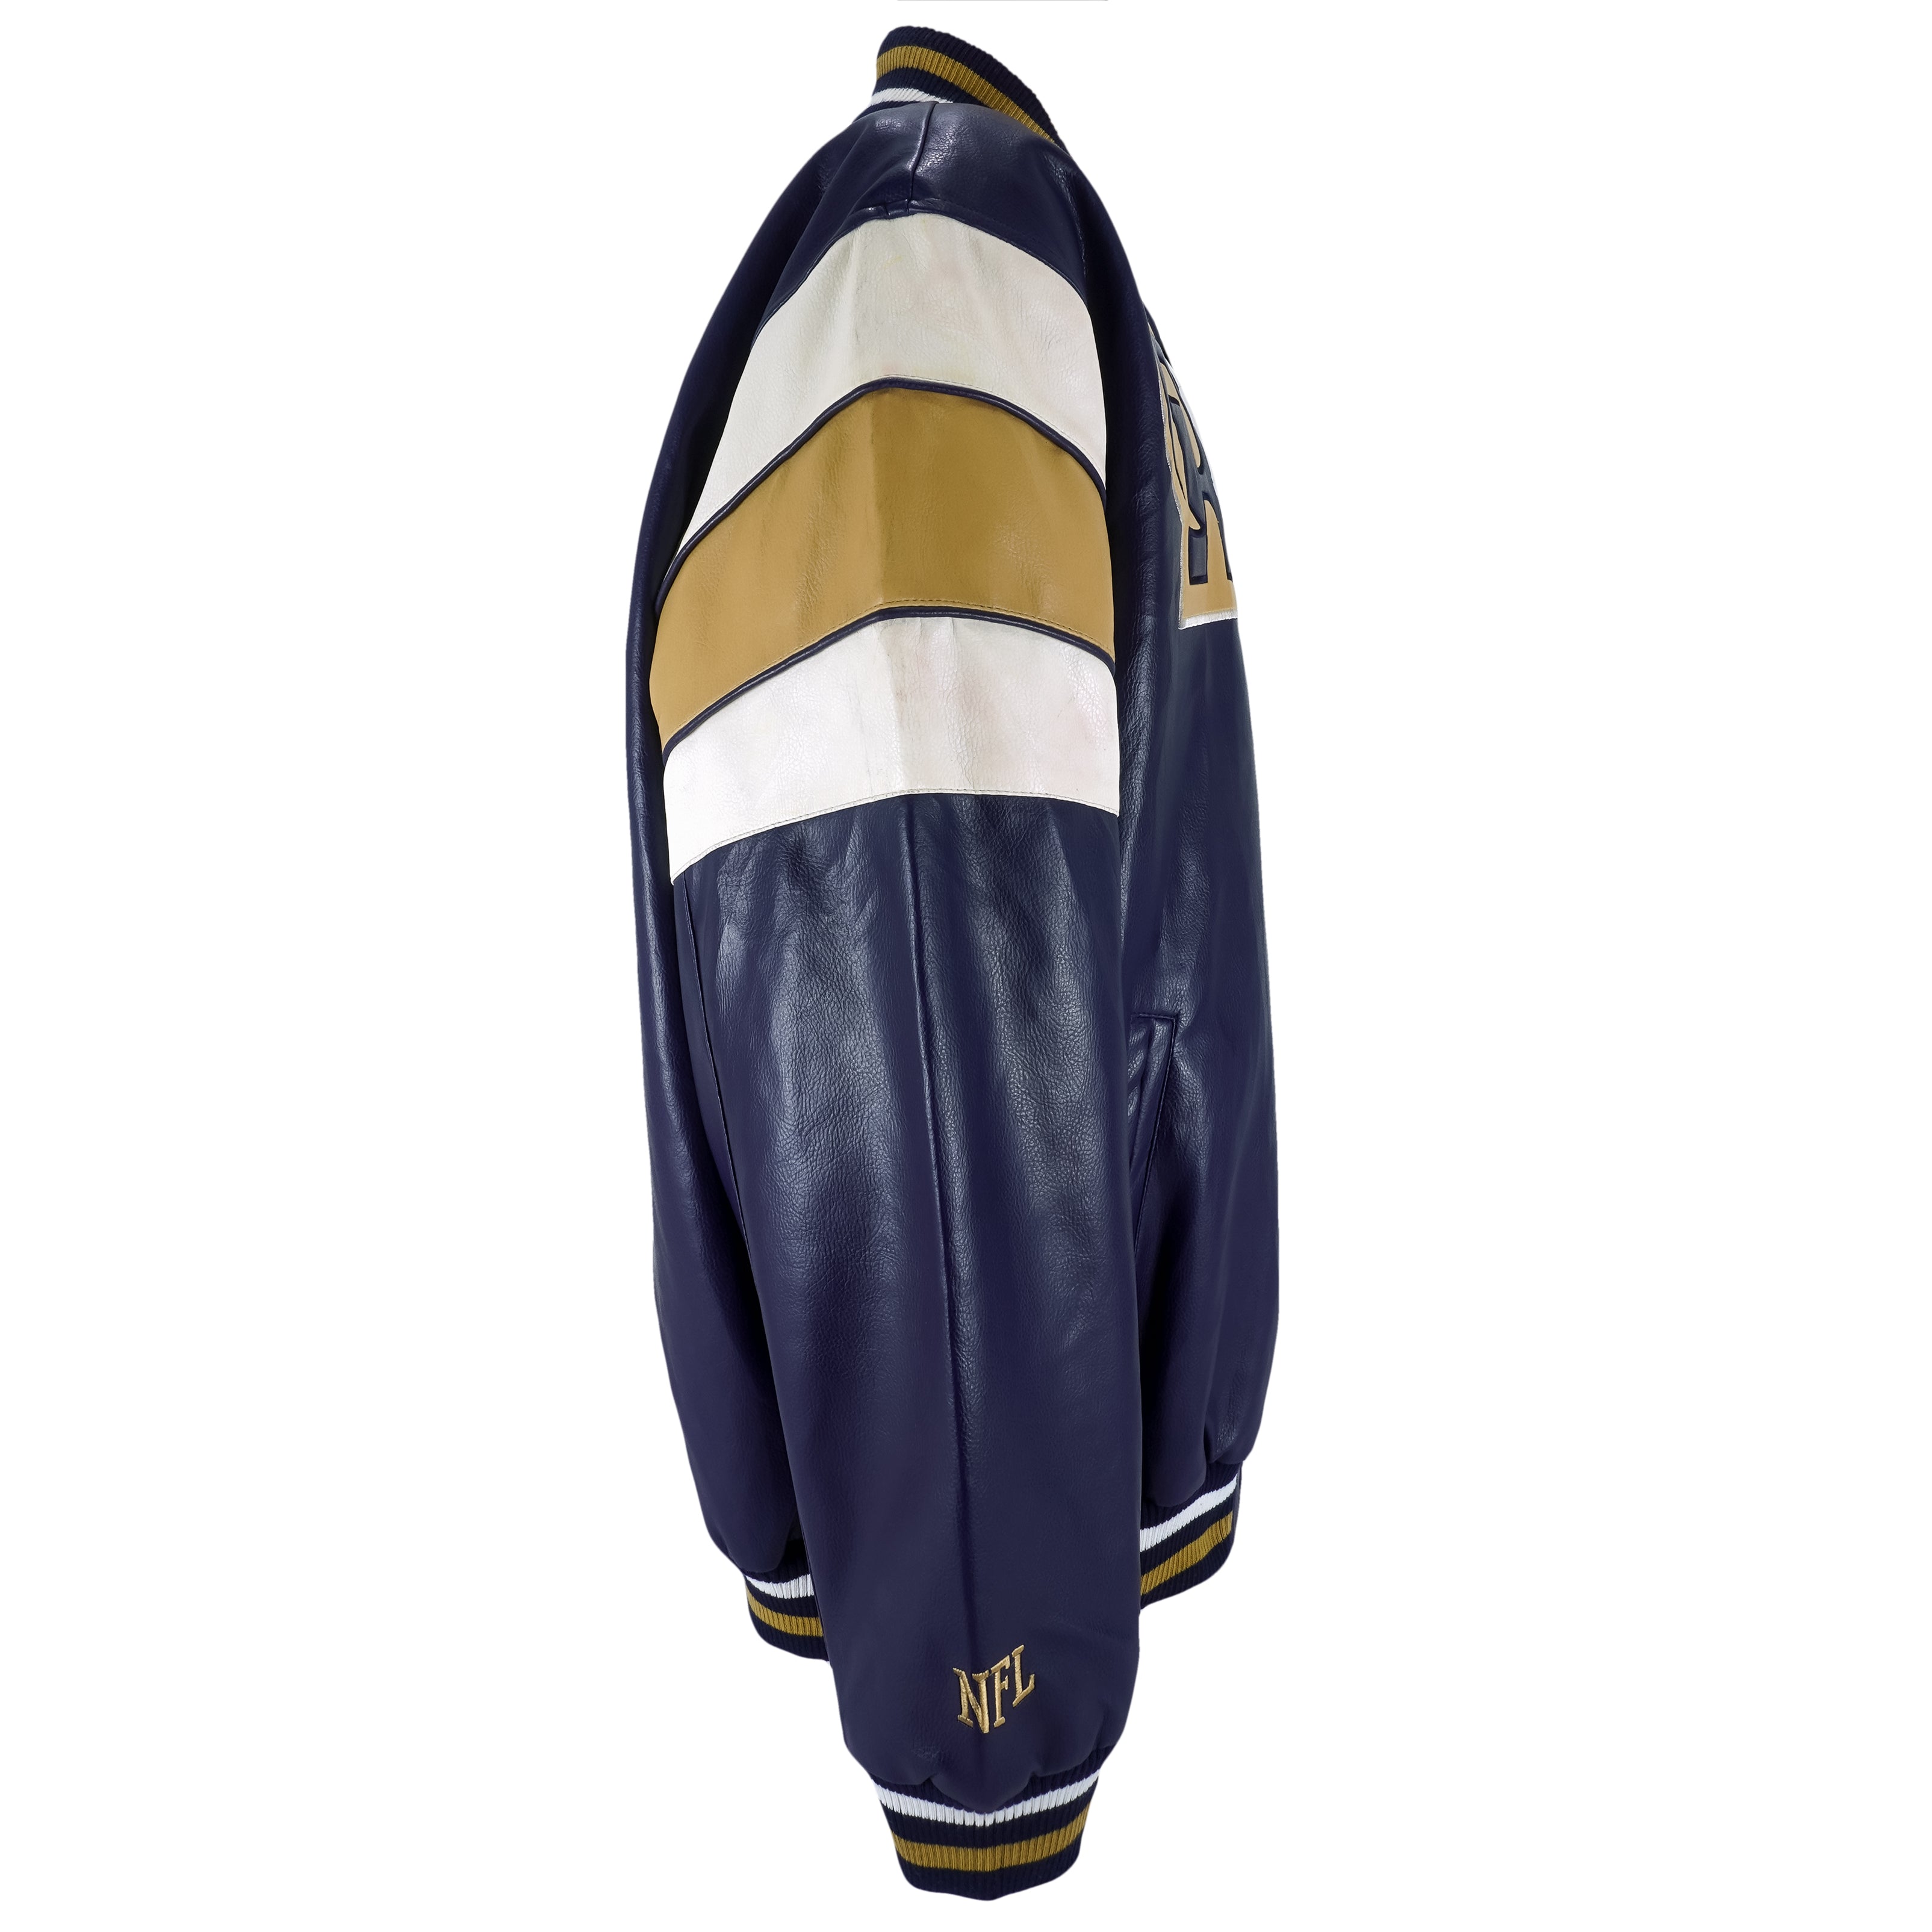 Maker of Jacket Fashion Jackets NFL Team St. Louis Rams Leather